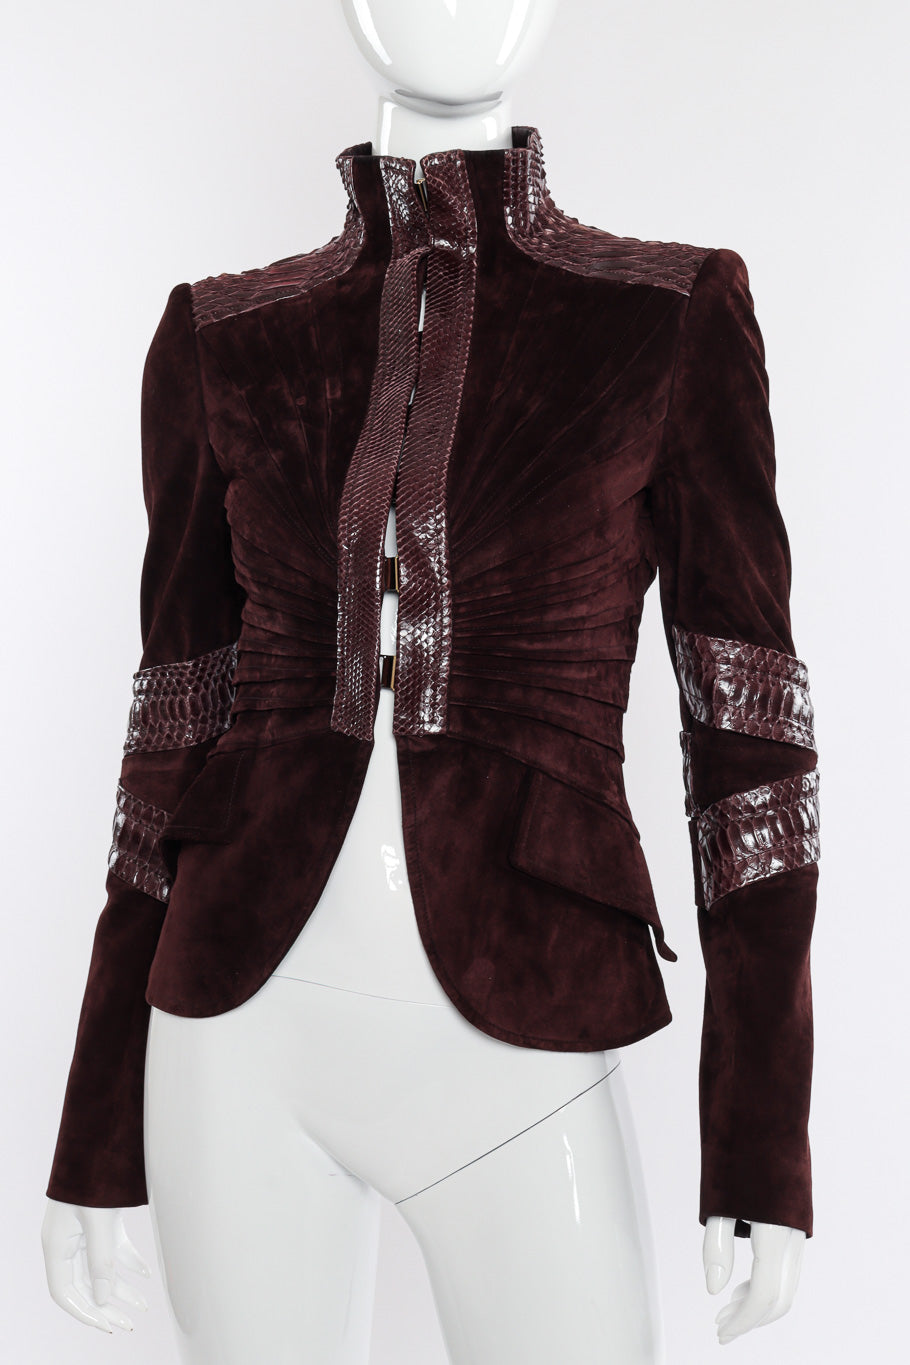 2004 F/W Suede Python Darted Jacket by Gucci on mannequin closed @recessla